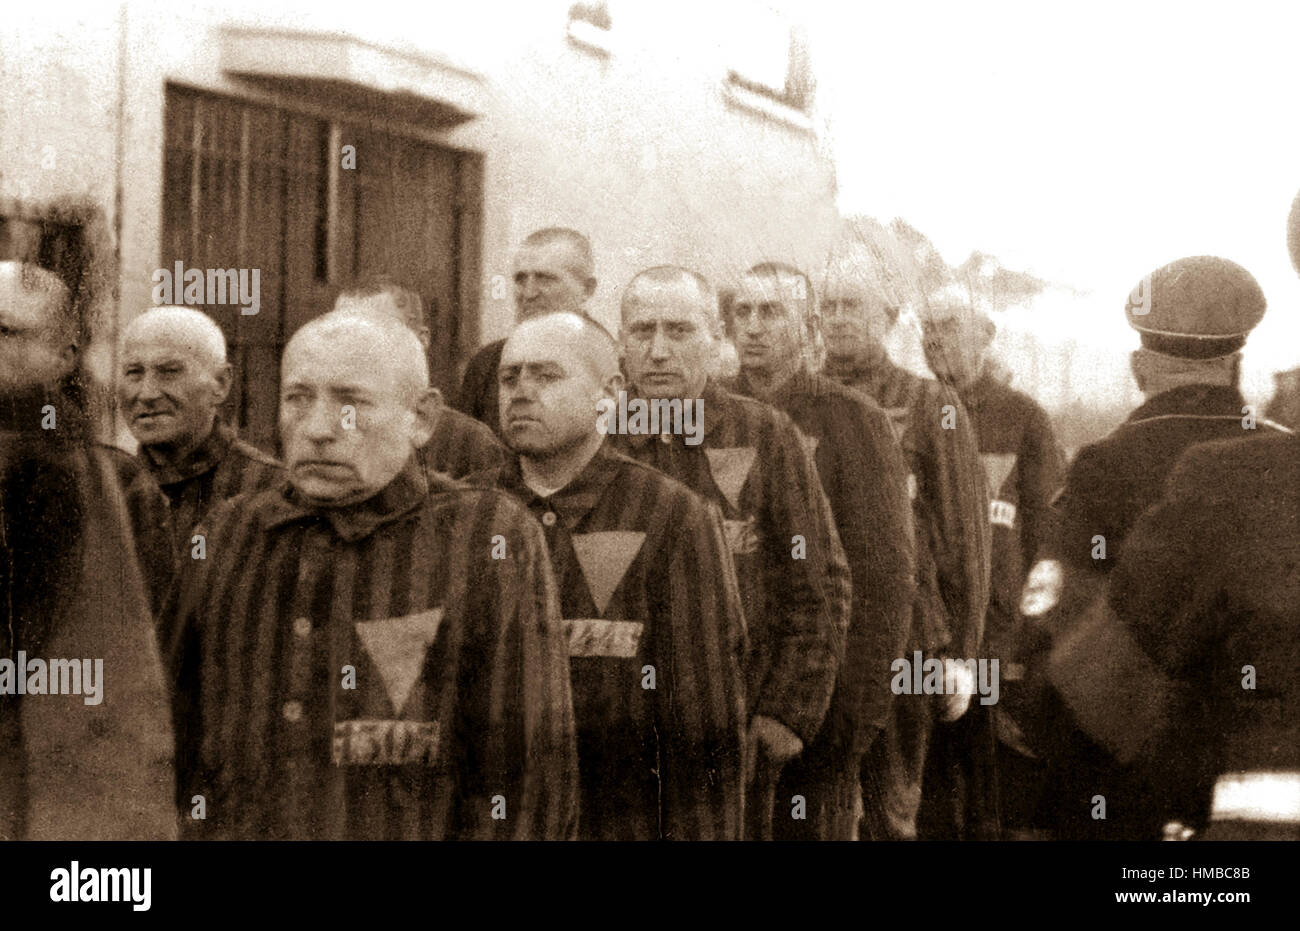 Prisoners in the concentration camp at Sachsenhausen, Germany, December 19, 1938.  Heinrich Hoffman Collection.  (Foreign Record Seized) Stock Photo